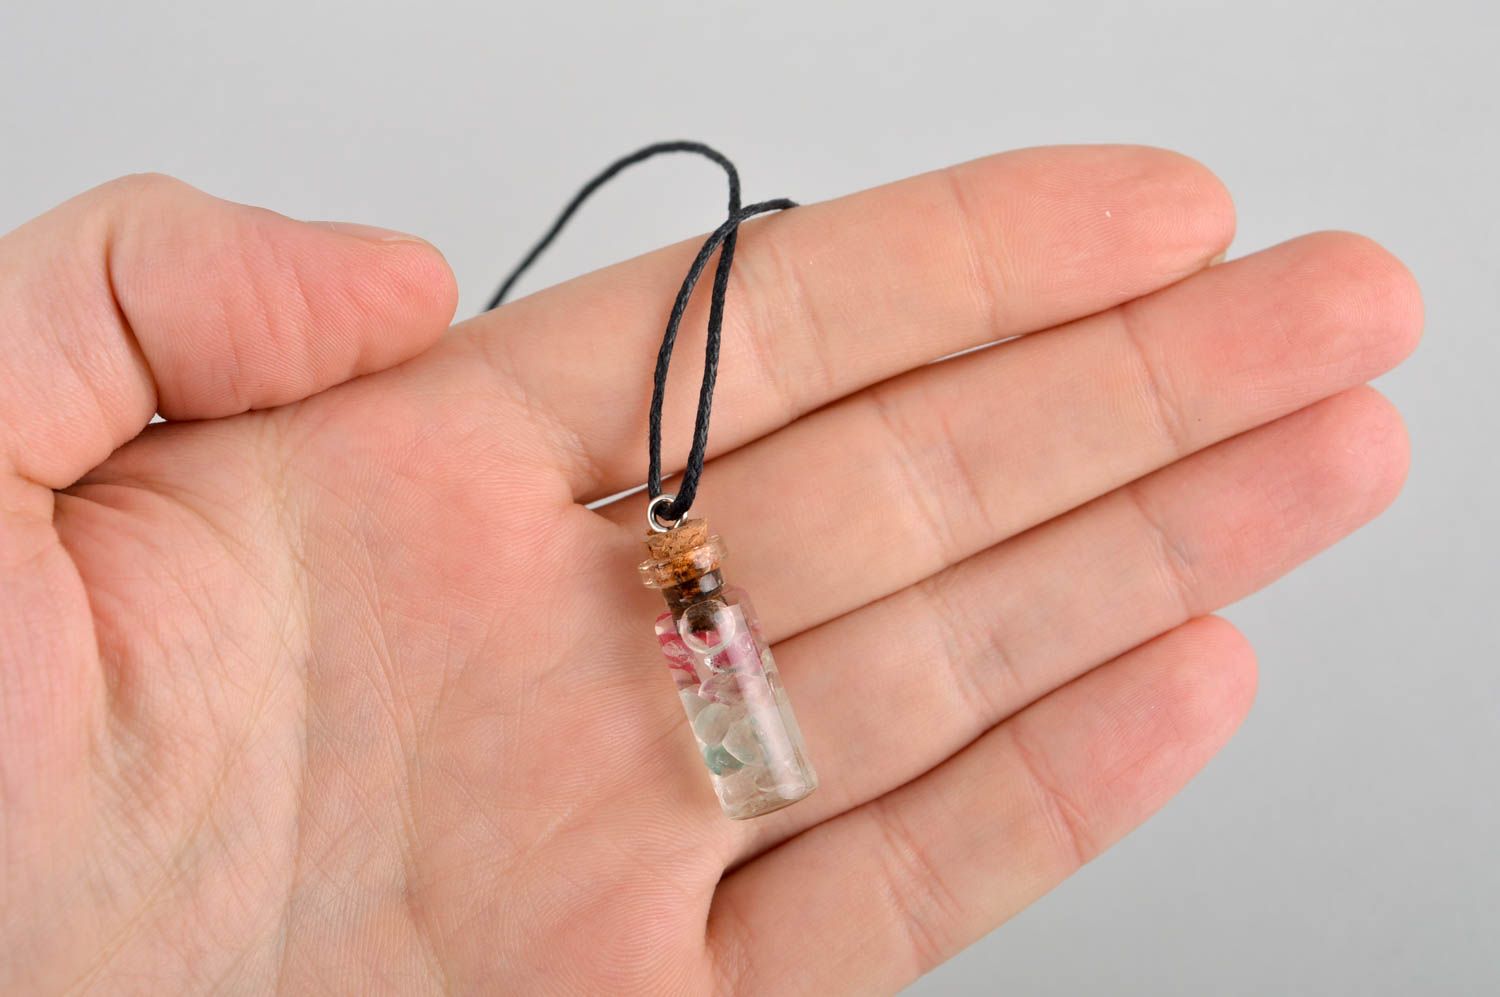 Homemade jewelry glass vial charm glass vial pendant necklace cool jewelry photo 5